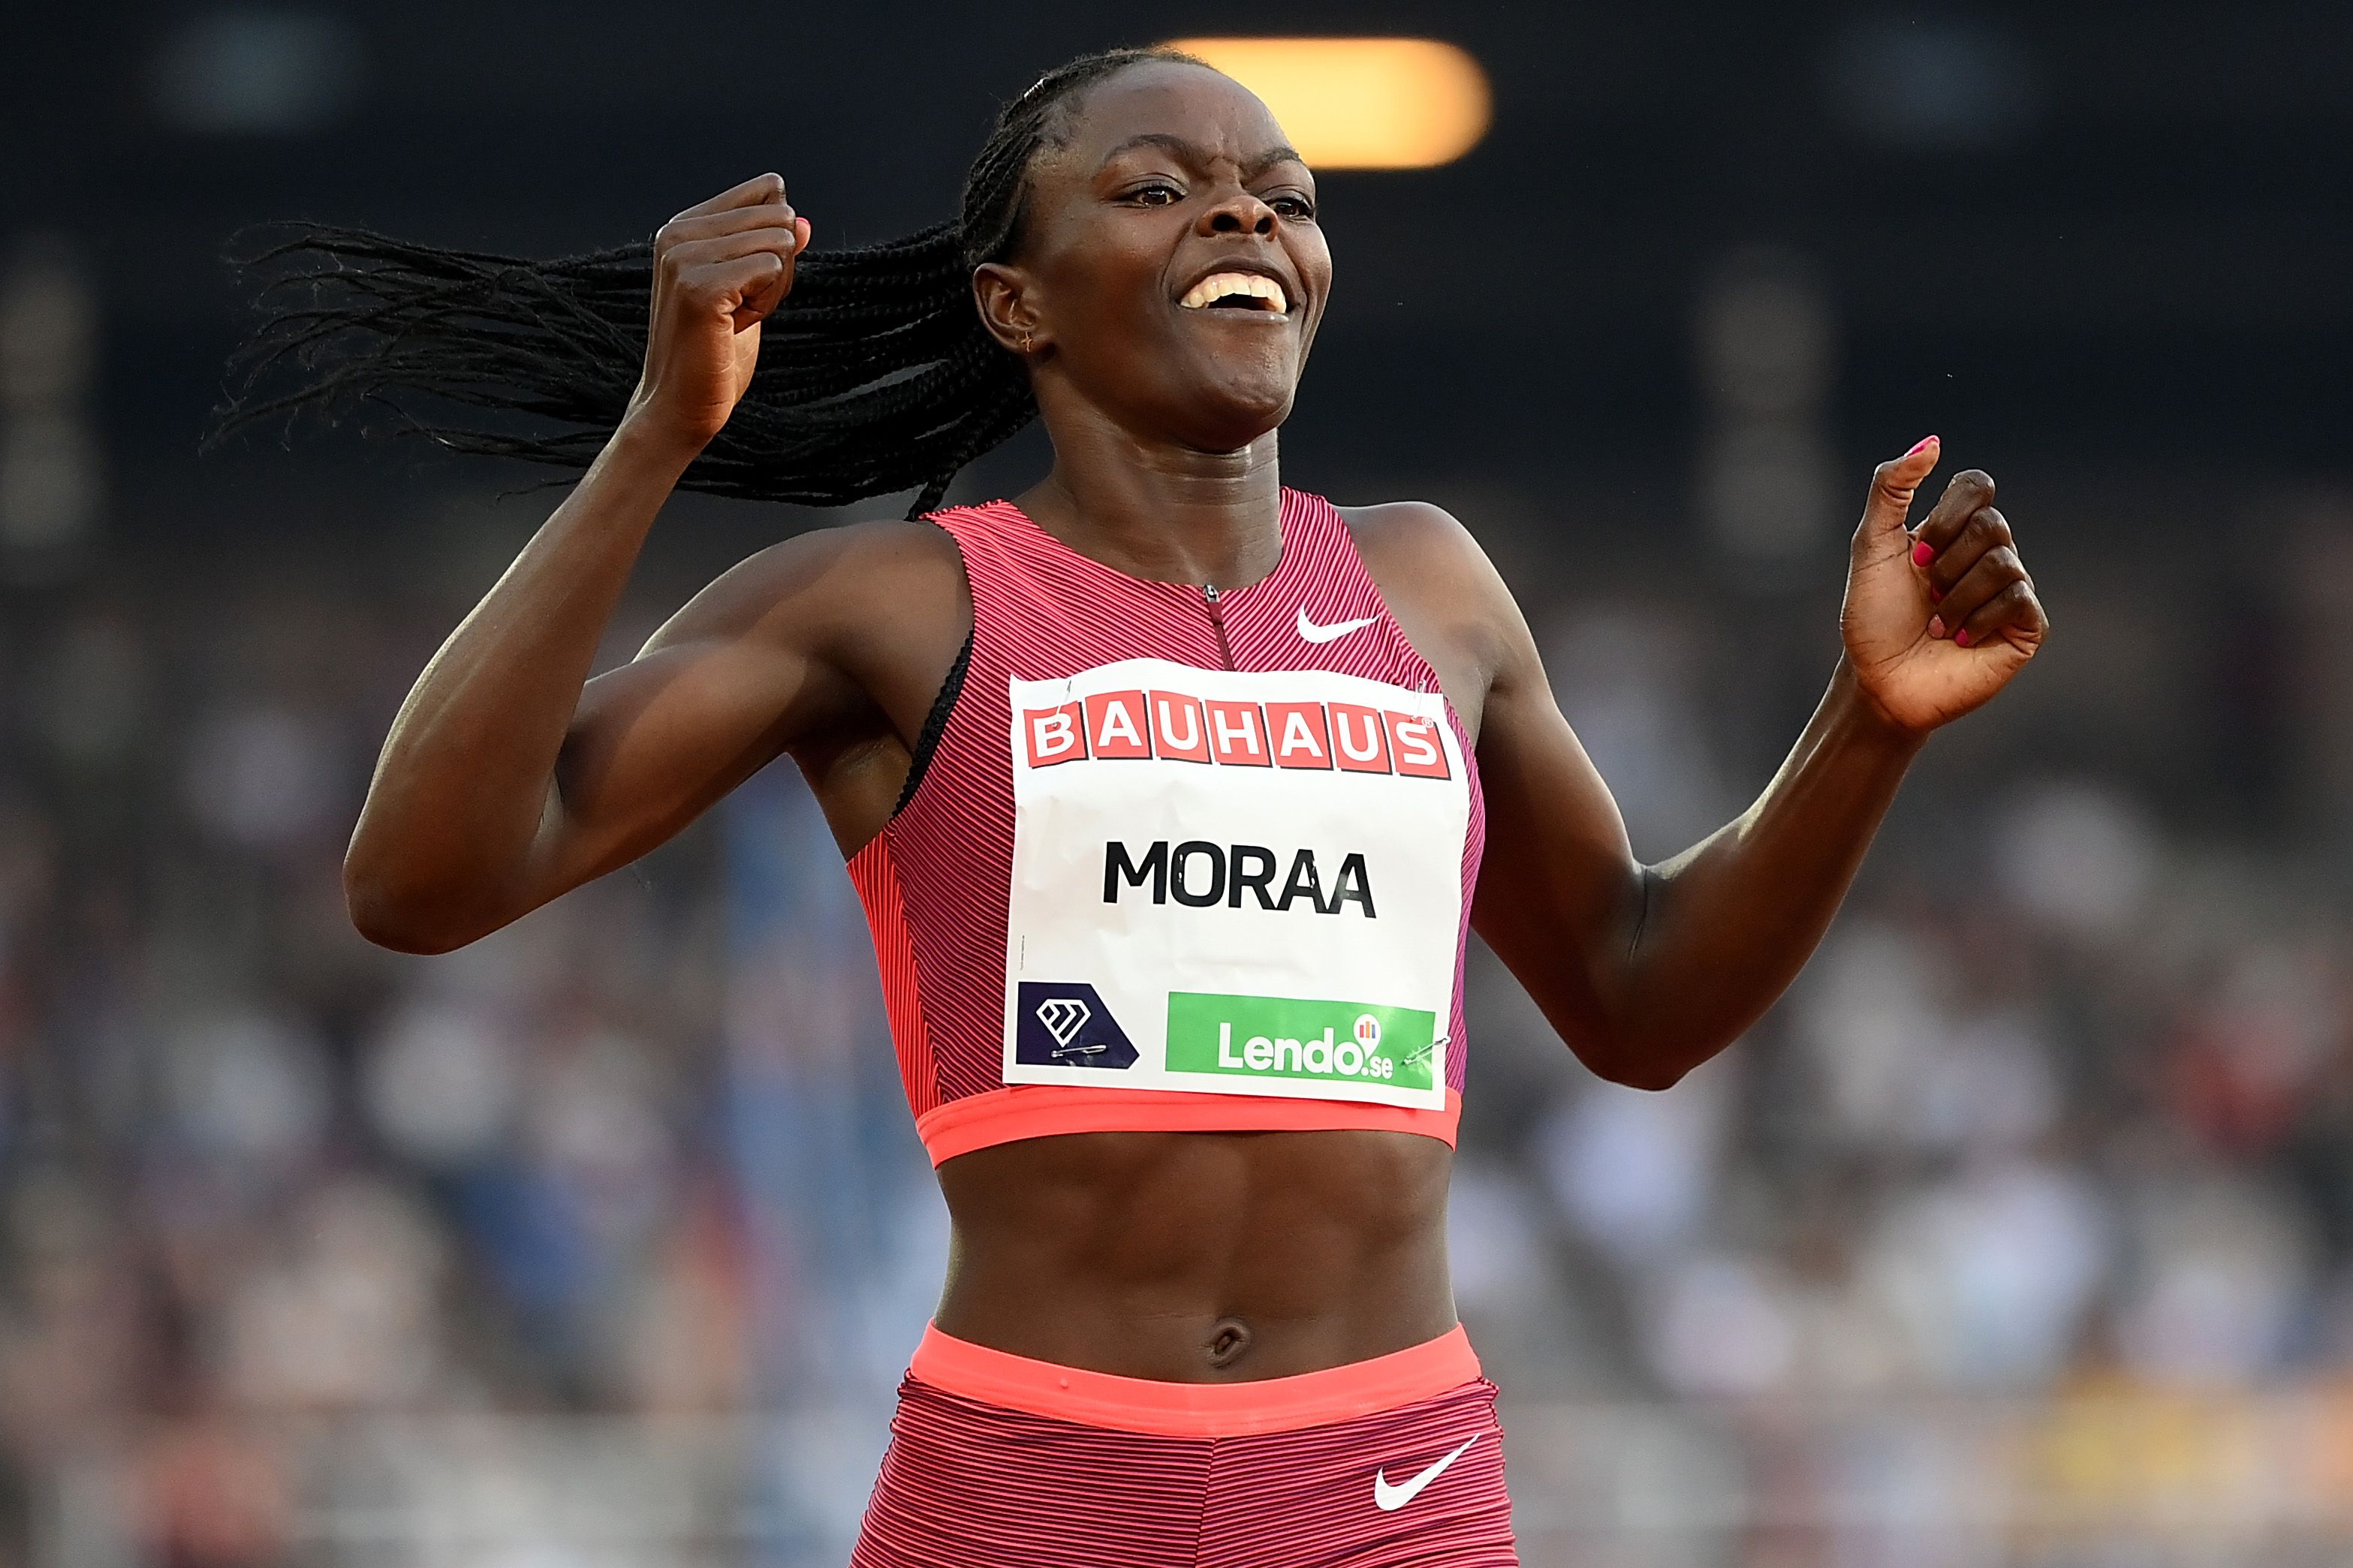 Mary Moraa wins the 800m at the Wanda Diamond League meeting in Stockholm